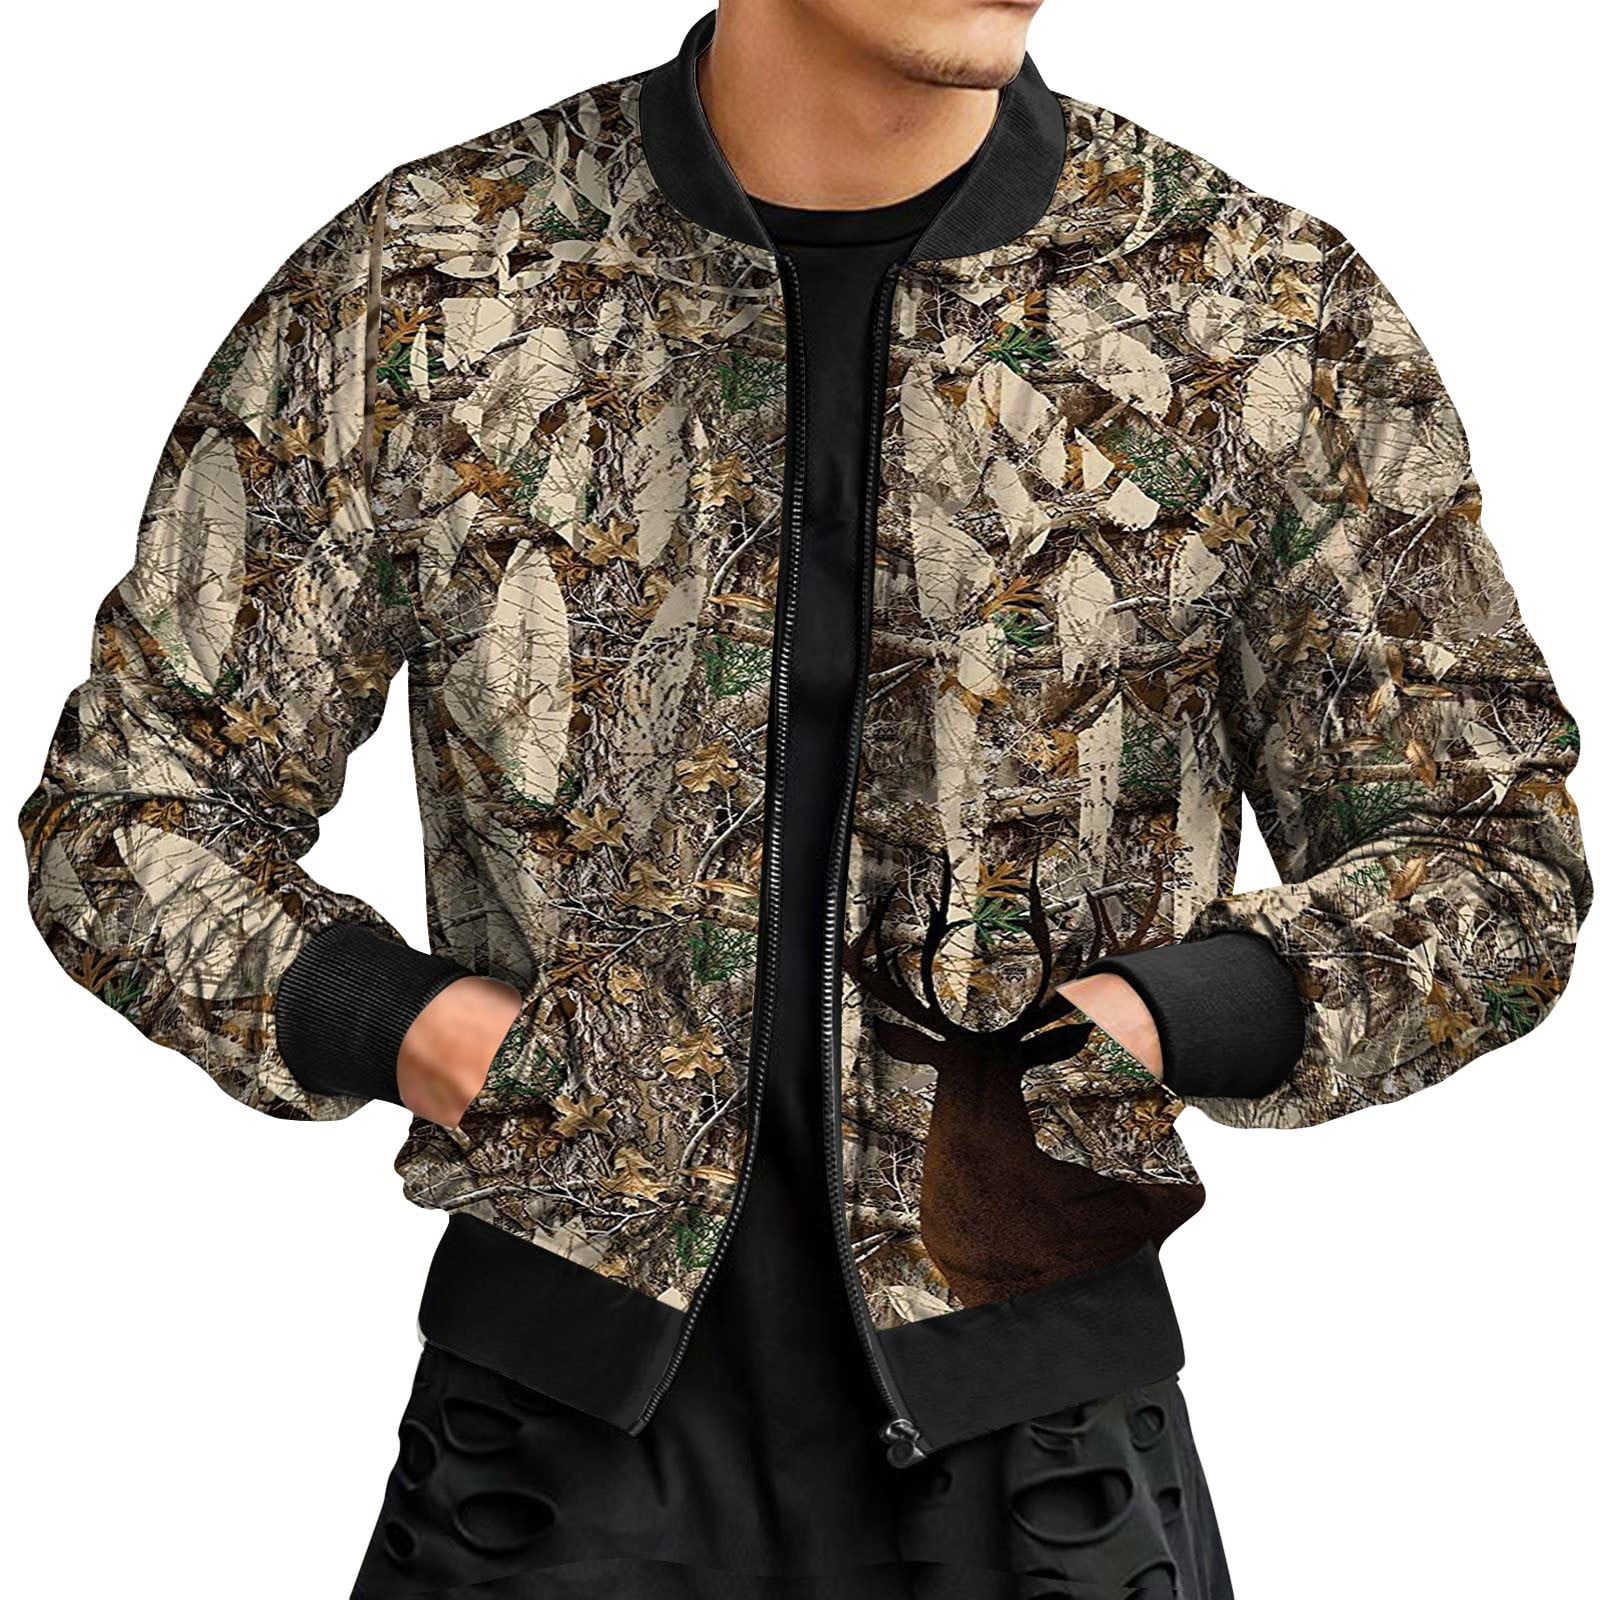 Yubnlvae Jackets for Men, Mens Autumn and Winter Leisure Sports Hunting ...